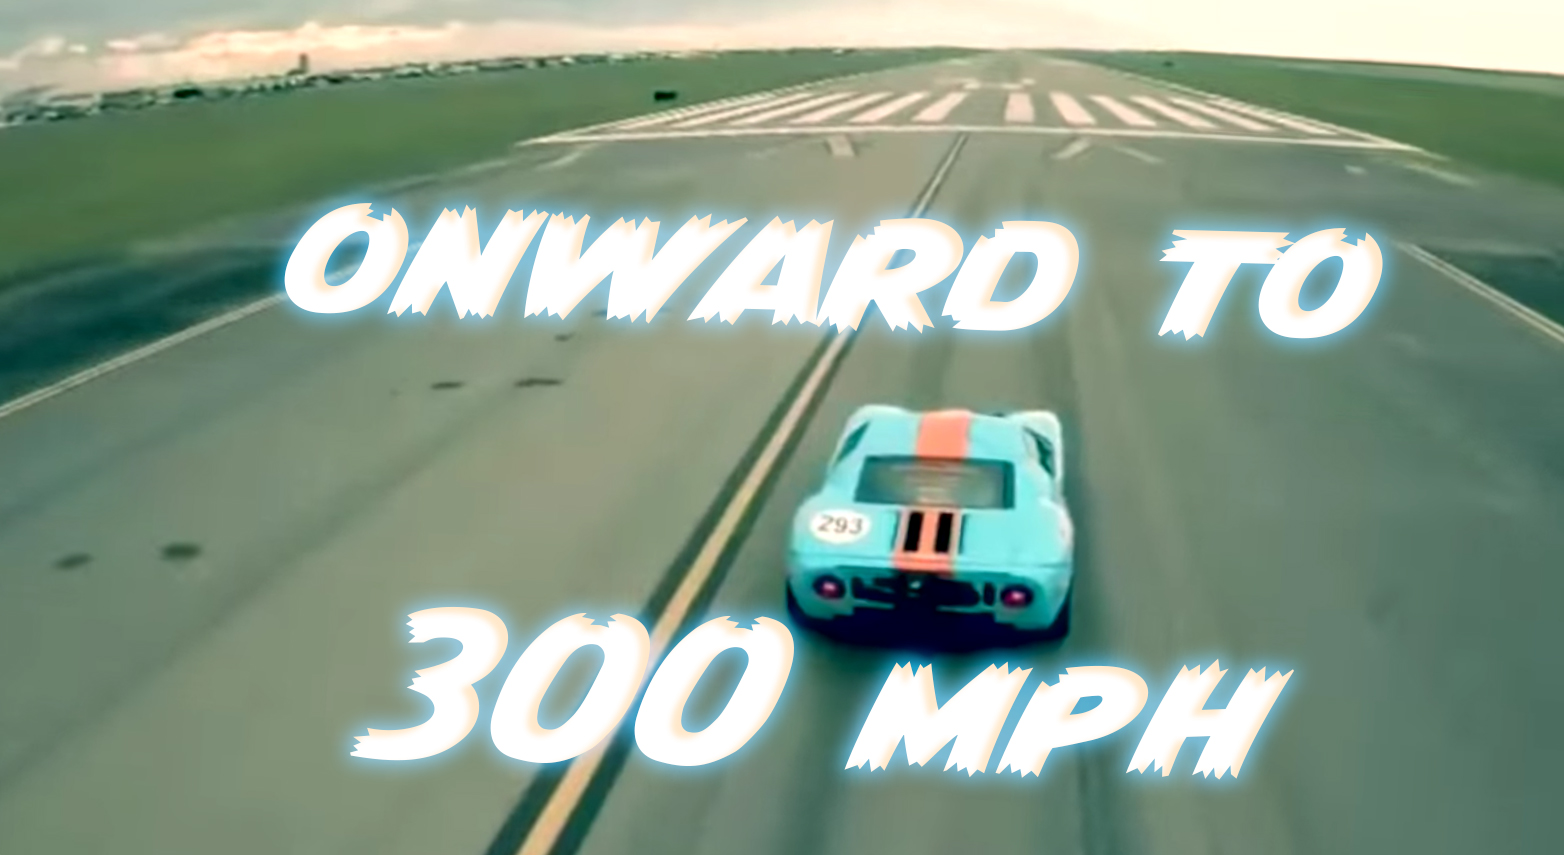 Ford GT goes 300 mph